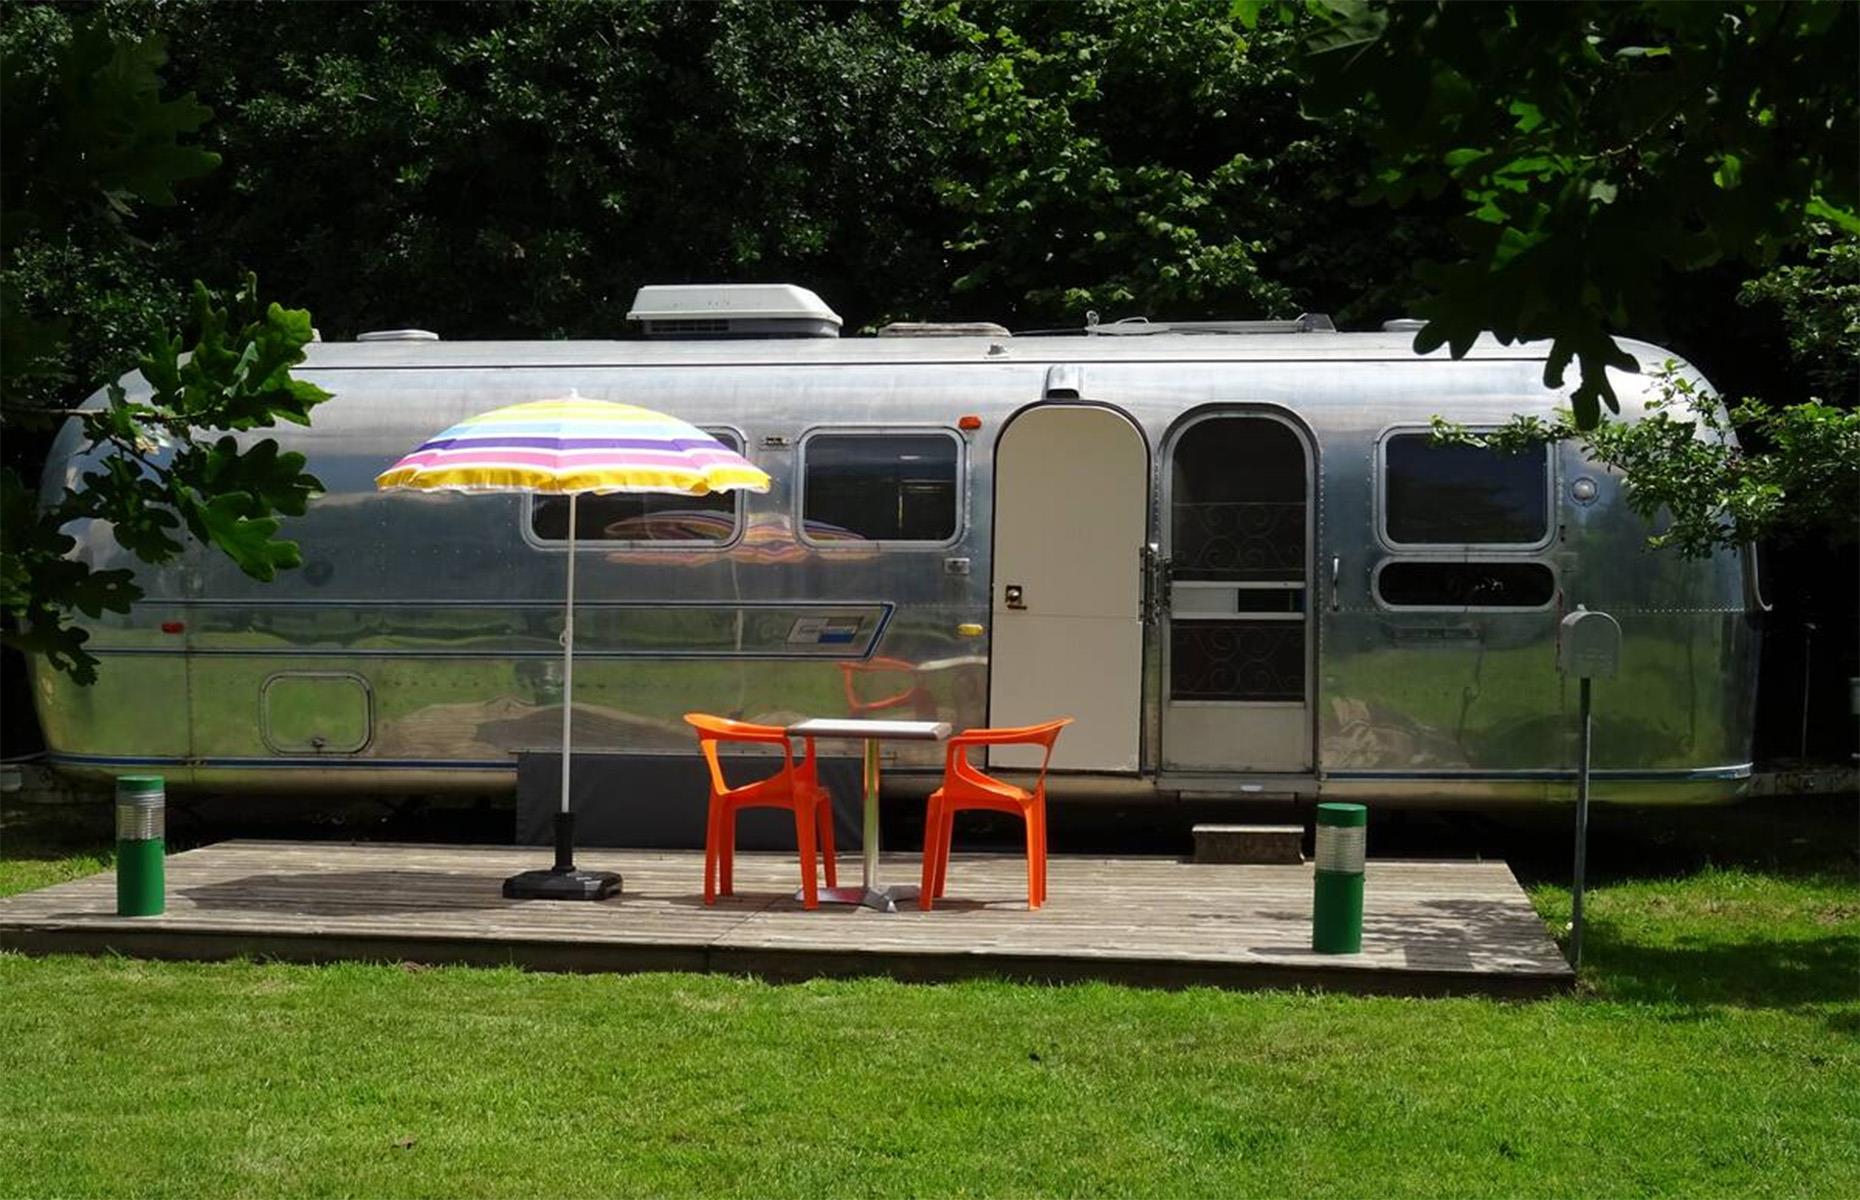 <p>Nestled in the French countryside, this authentic 1969 airstream is located on the outskirts of the Avaugour forest and the Meur wood.</p>  <p>With its dreamily remote location, the <a href="https://www.airbnb.co.uk/rooms/660546294826723141">Airbnb</a> offers the best that the great outdoors has to offer, from hiking, to mountain biking, to horseback riding through the surrounding foothills.</p>